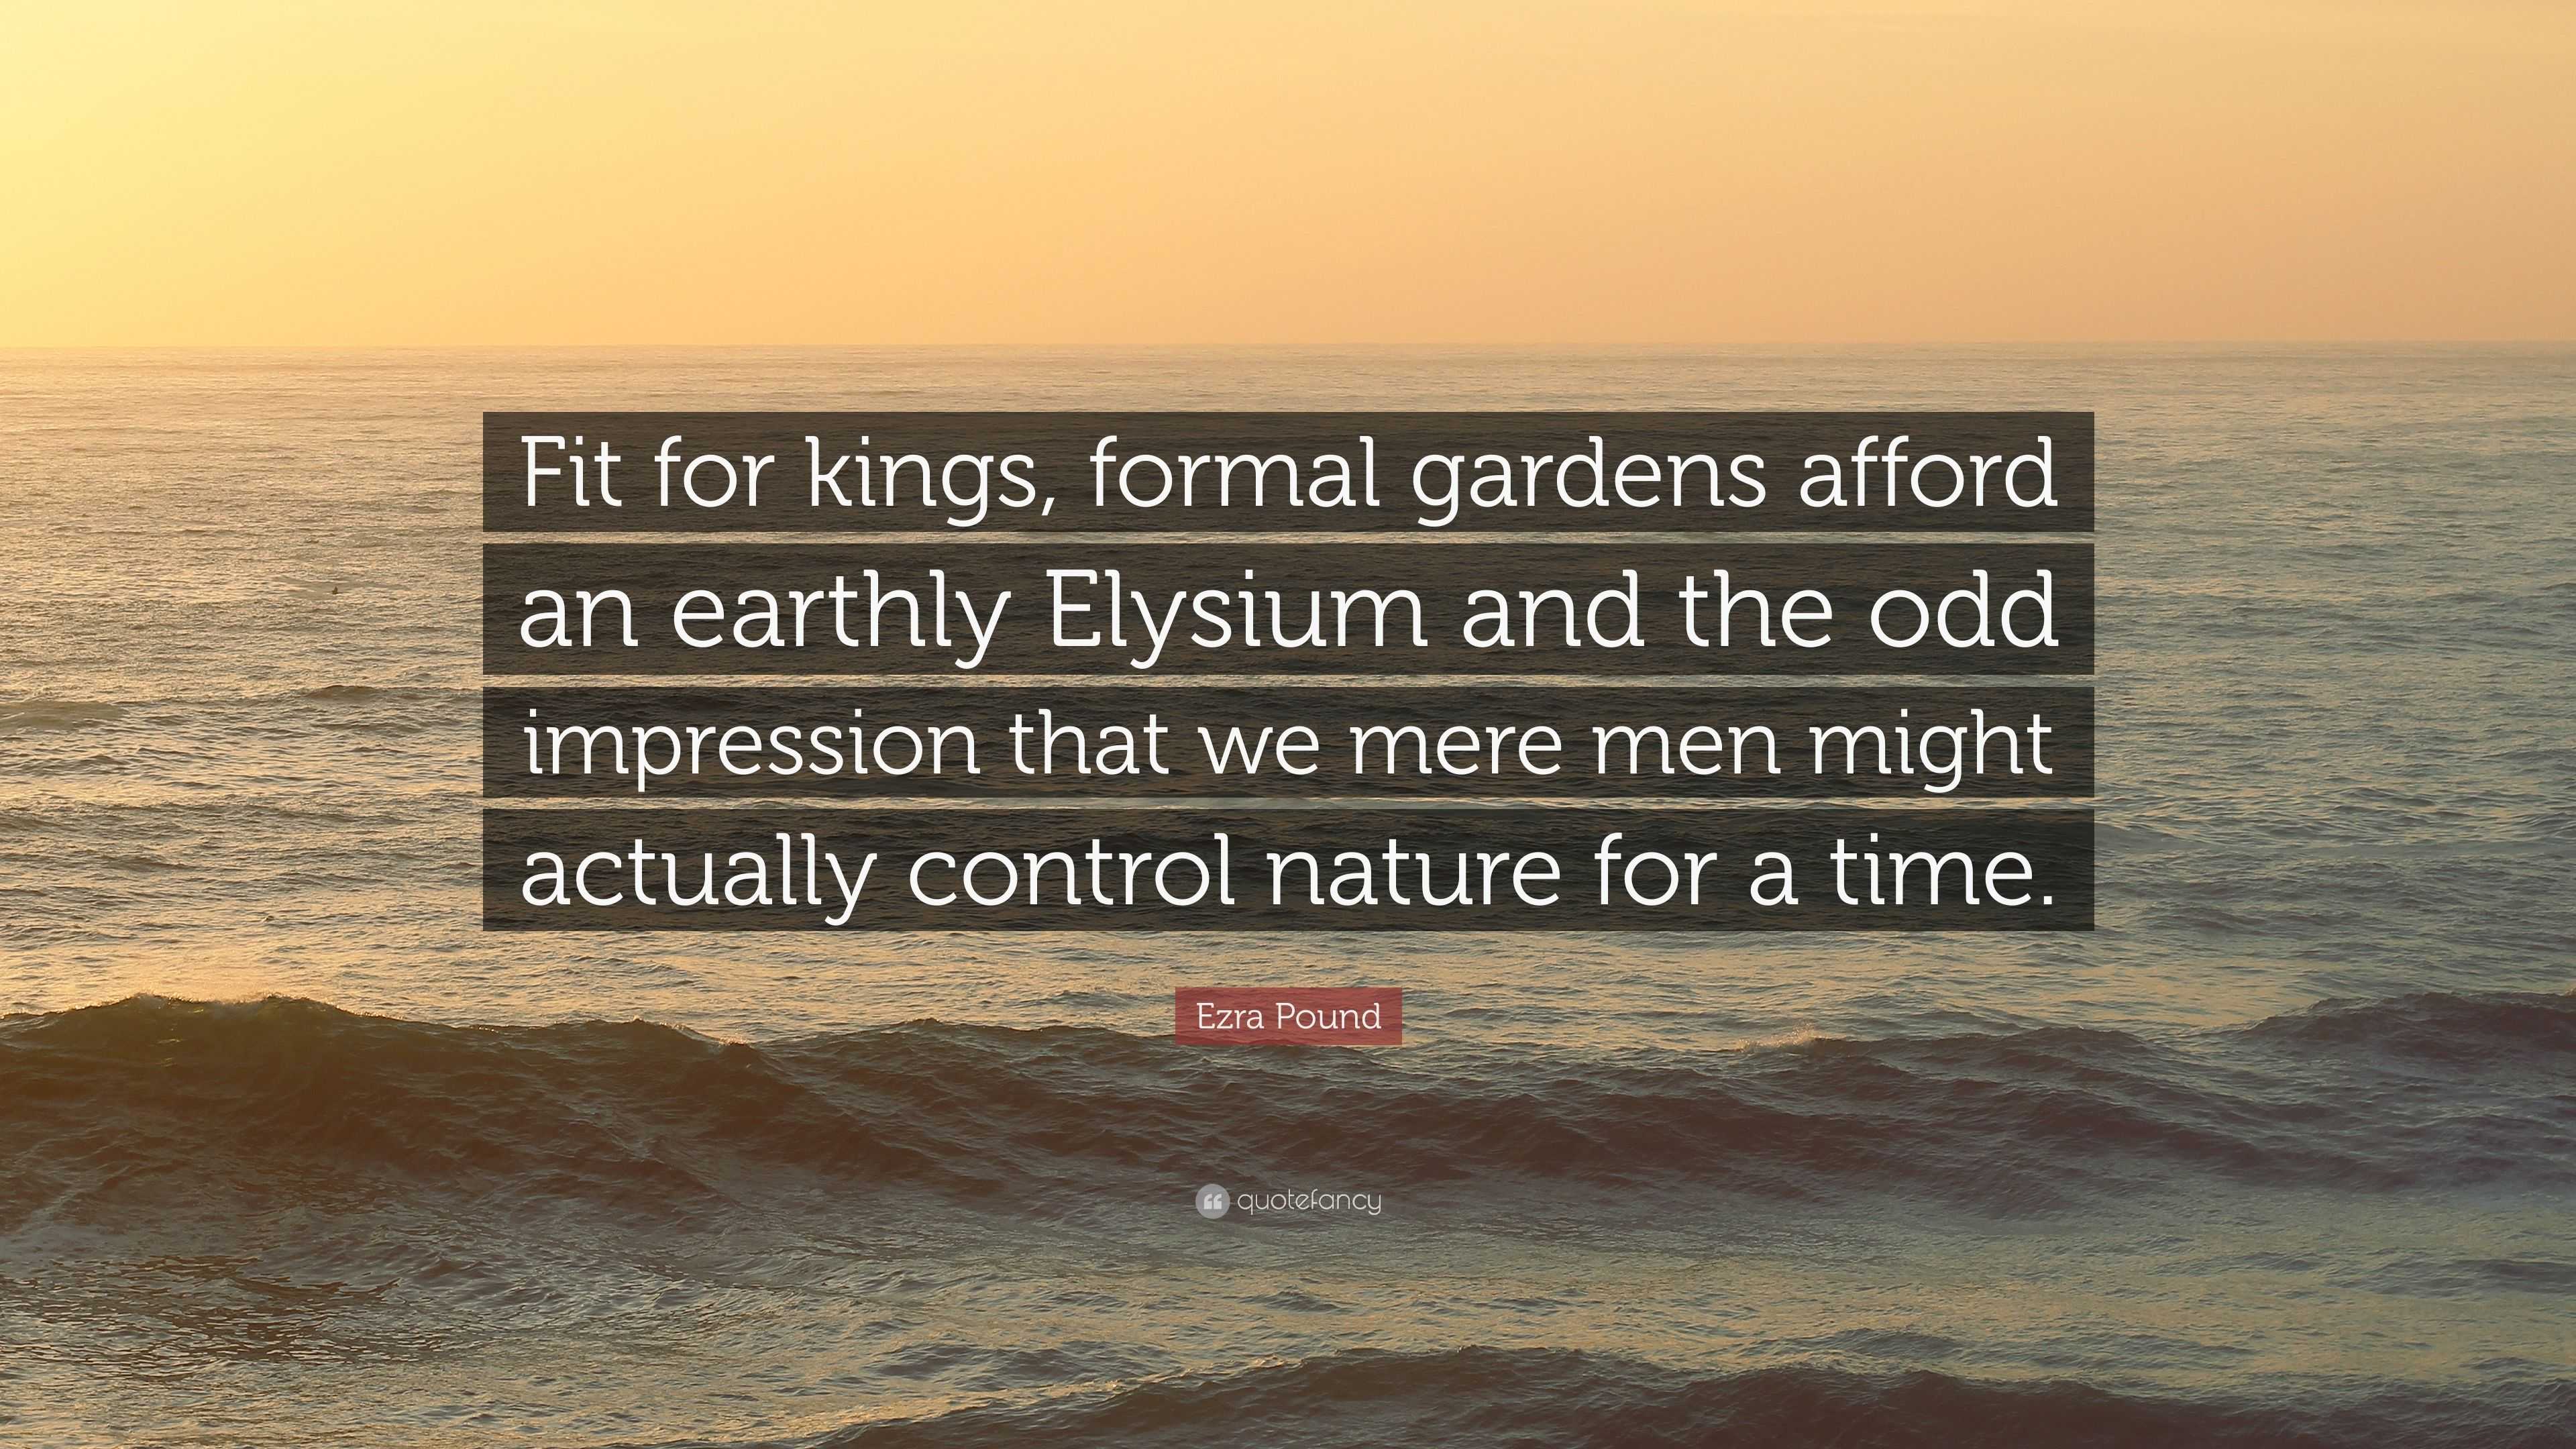 Ezra Pound Quote Fit For Kings Formal Gardens Afford An Earthly